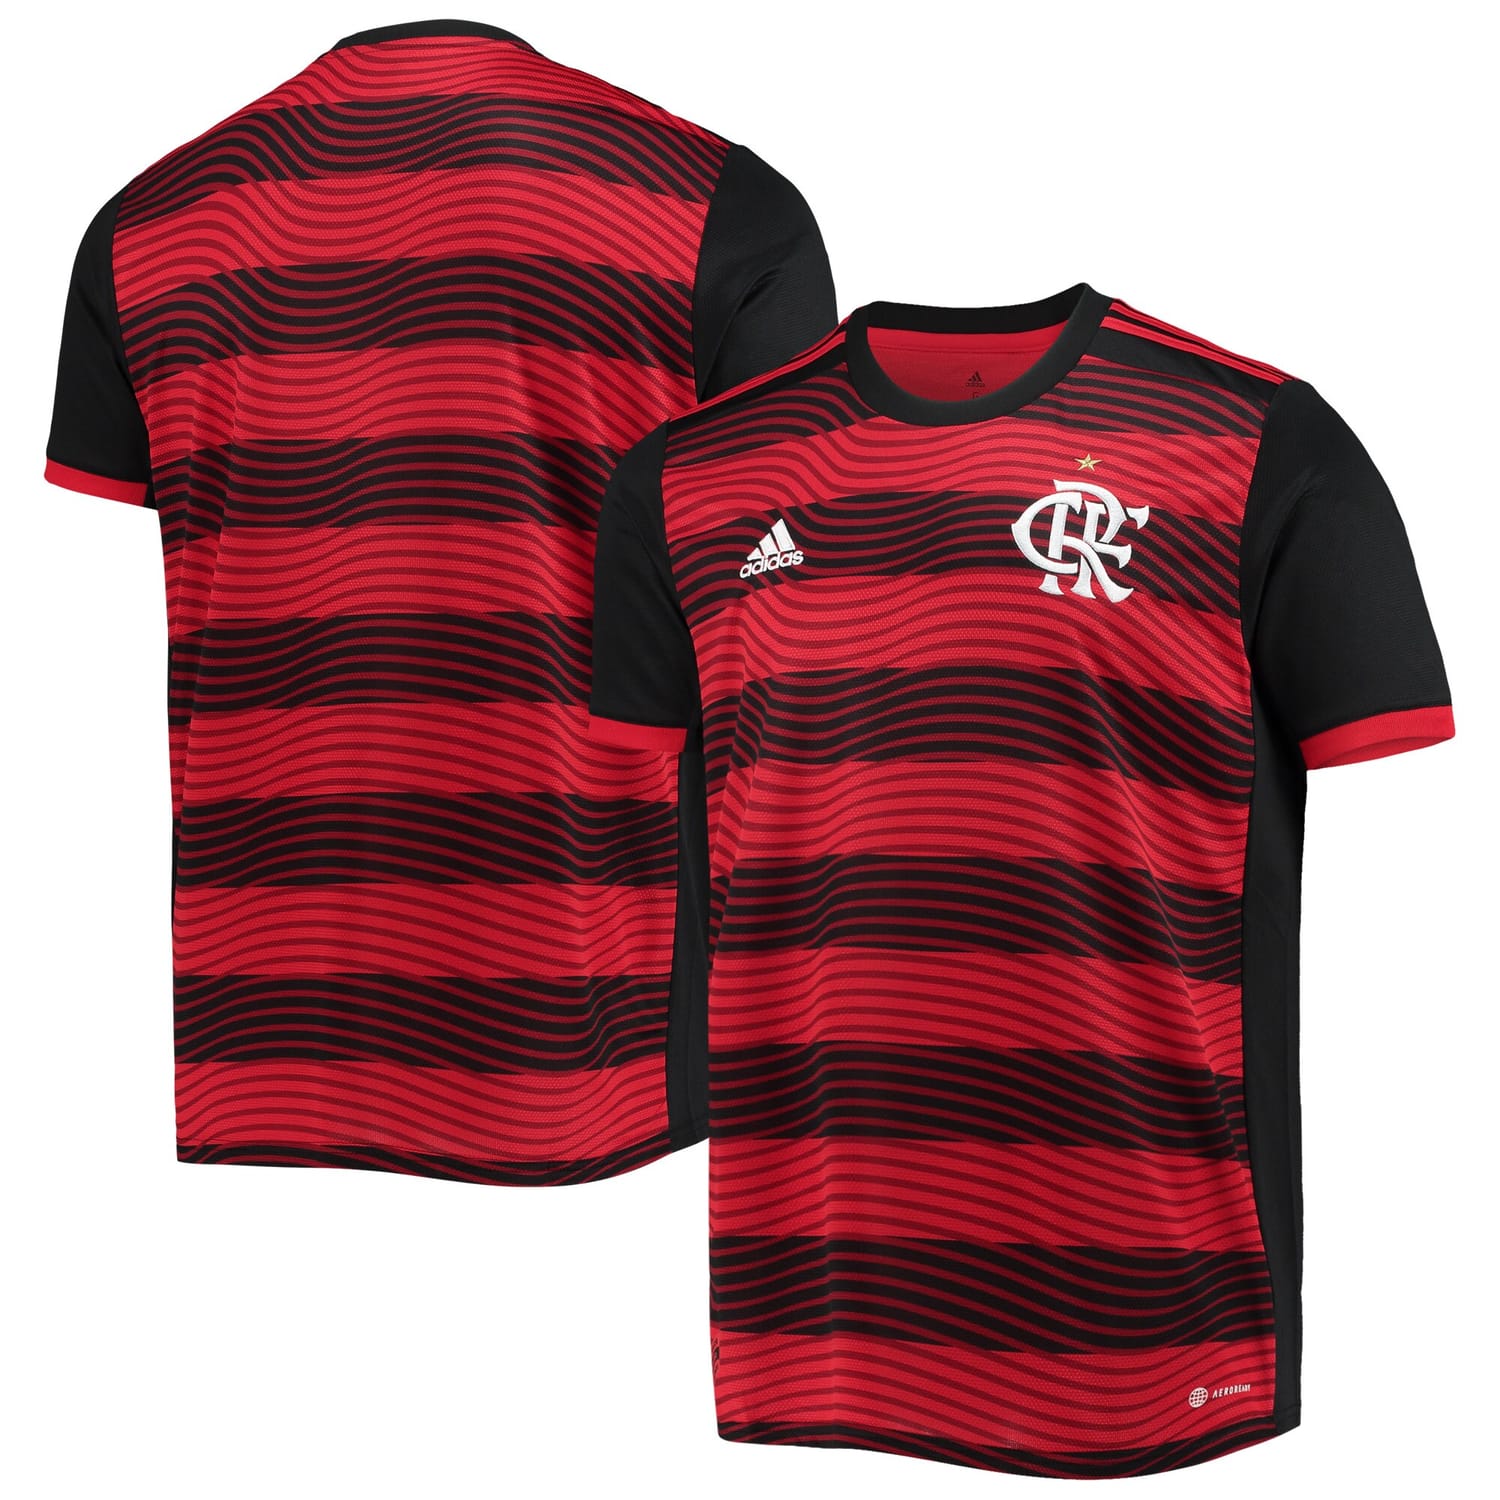 CR Flamengo Home Red Jersey Shirt 2022-23 for Men